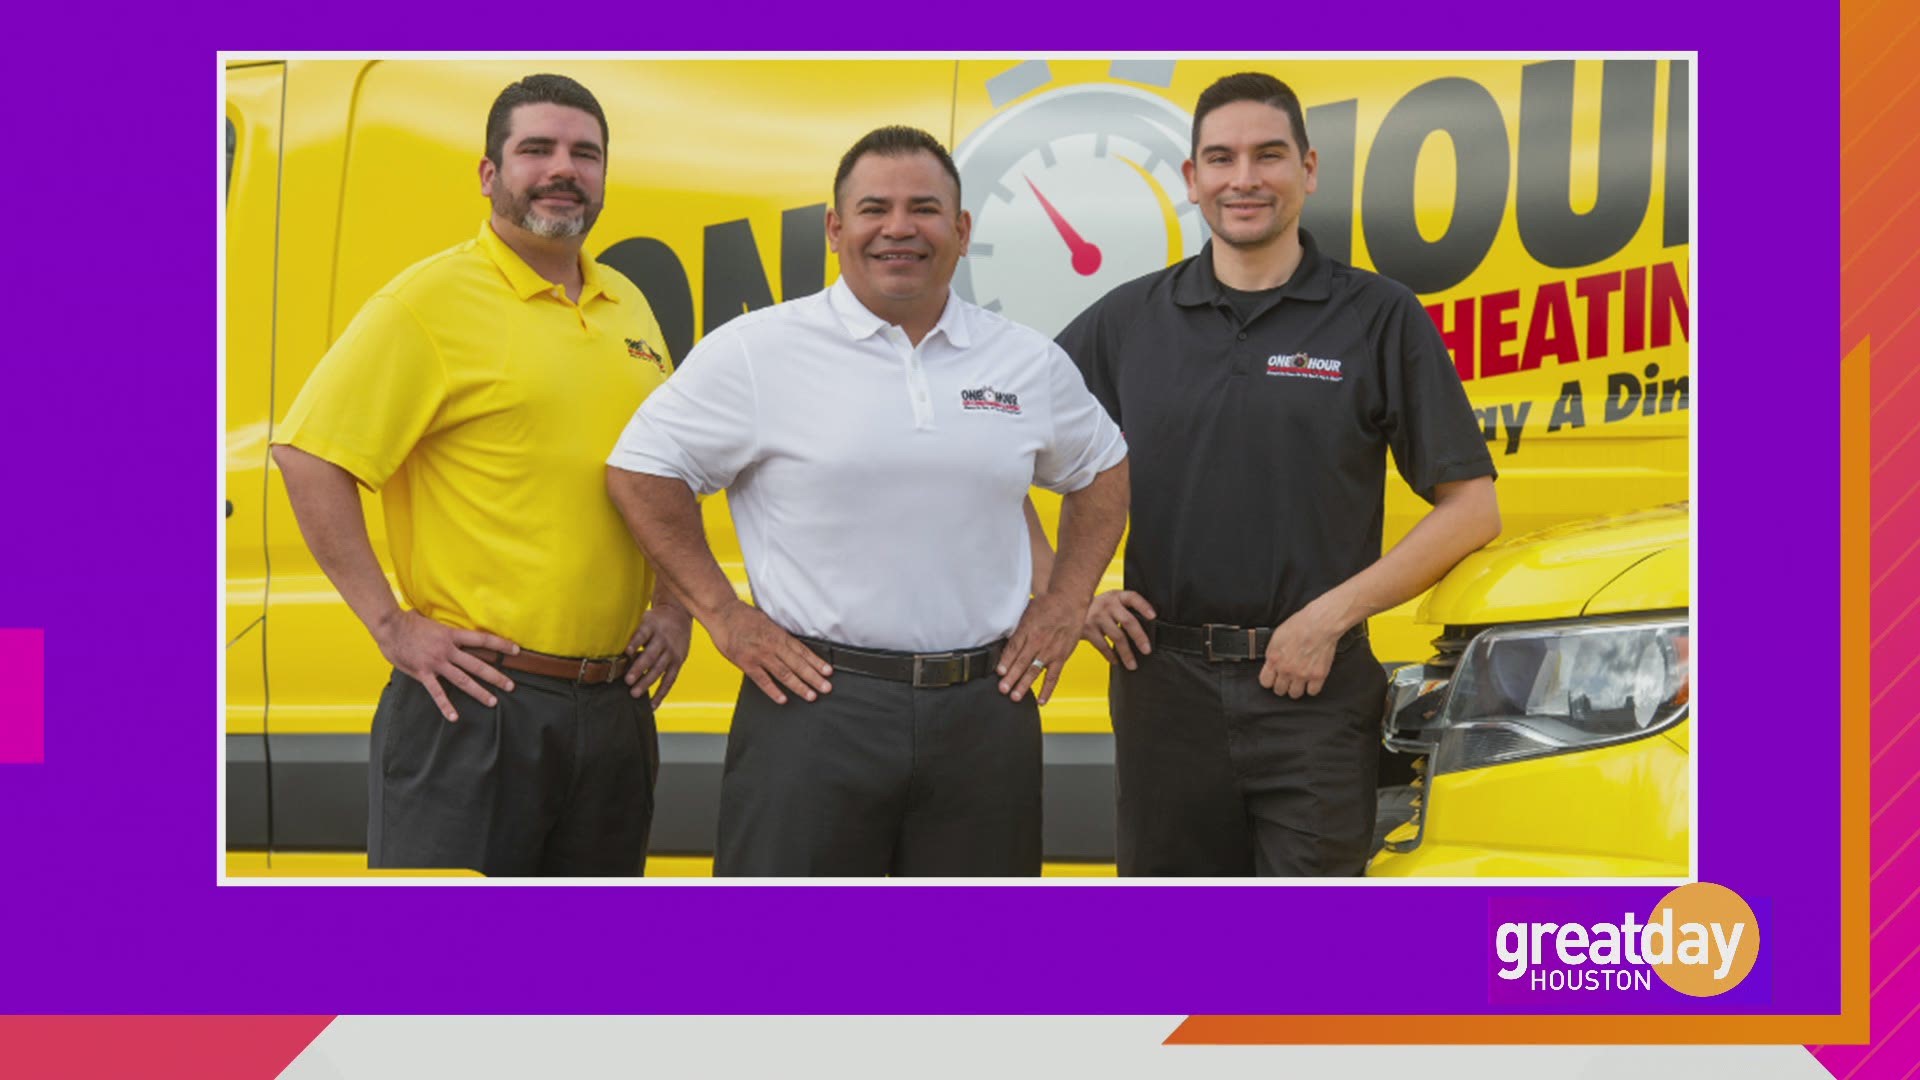 Jimmy Sanchez with One Hour Air Conditioning & Heating recommends regular tune-ups to keep your system running smoothly